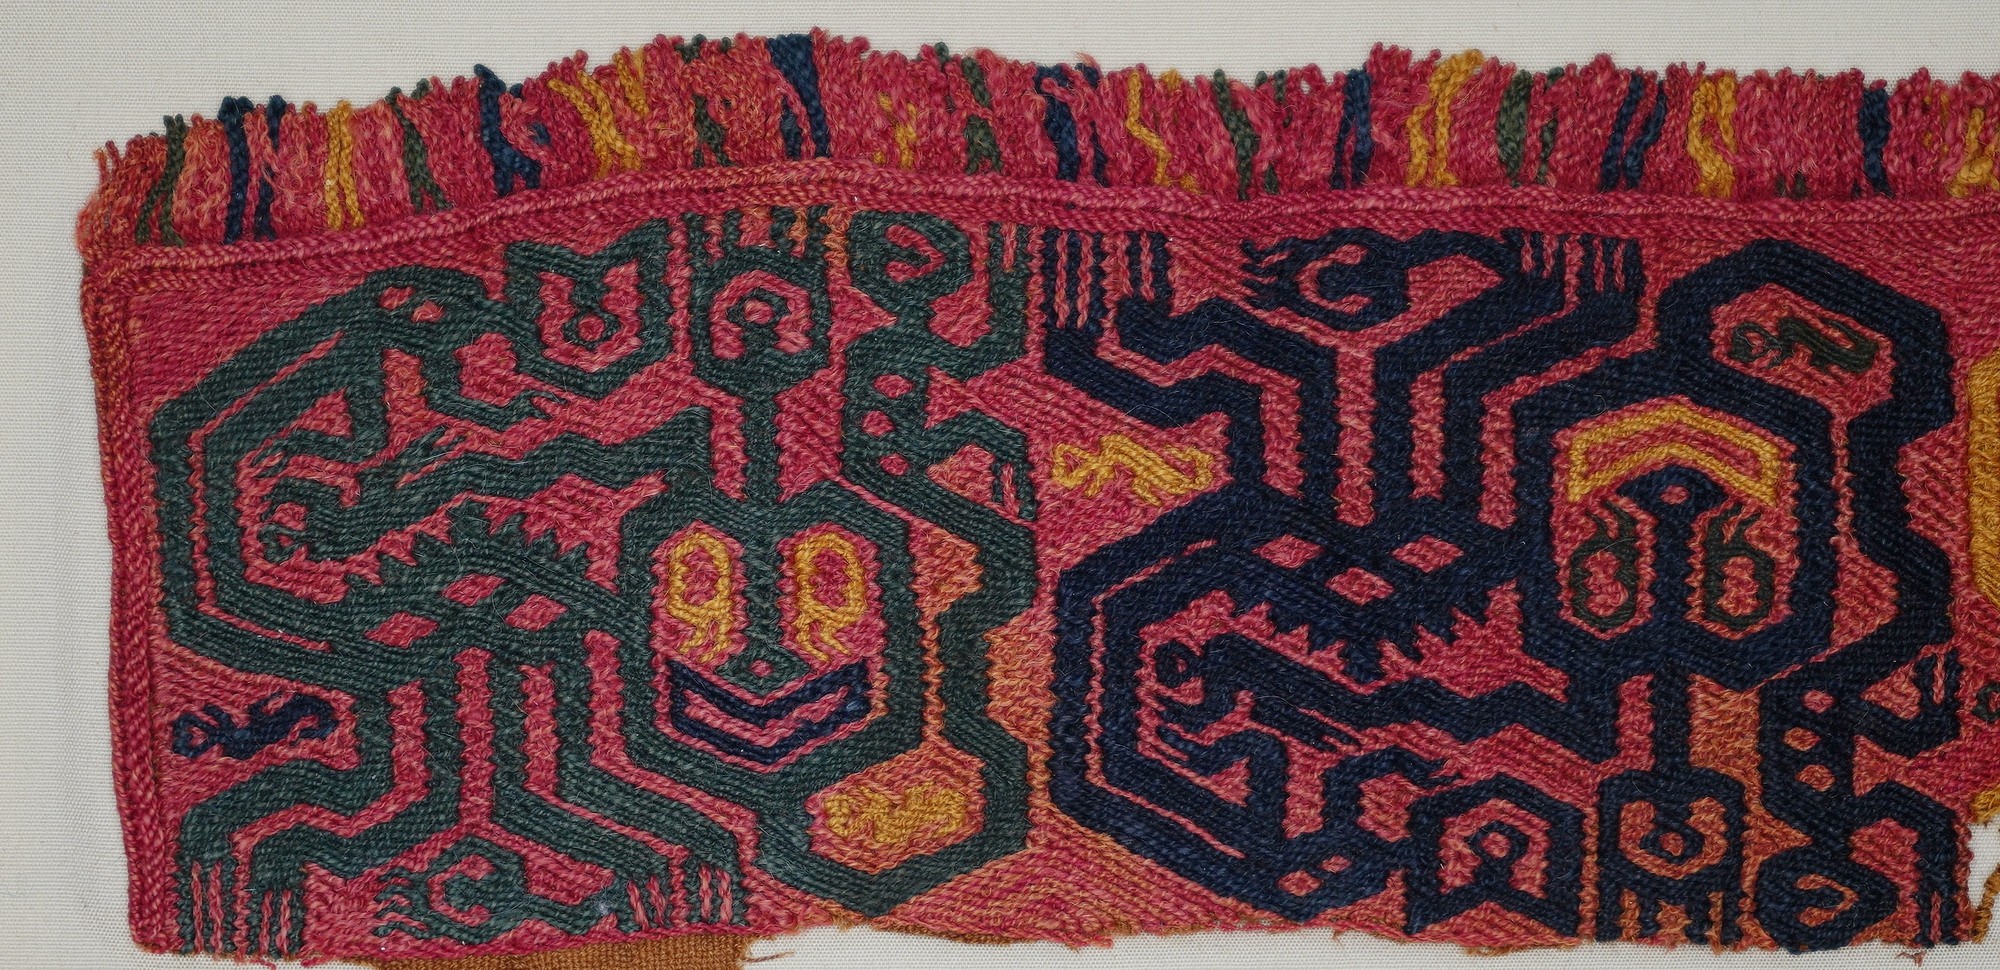 Peru, Paracas  Border Section with Three Colorful Felines on Red Gound
Paracas textiles served as a medium of communication between the realms of the living and the dead.  This Linear style border section features three embroidered feline figures in alternating colors and positions.  One edge has its original fringe intact.  The feline figures represent the "Oculate Being," a prevalent theme occurring throughout the Paracas period.  Here the feline motif is presented with an oversized, characteristically heart-shaped head with a wide smiling mouth and hexagonal eyes.  Another geometricized form springs from the center of each of the feline heads.  Long slender appendages forming the legs of the creatures end in forked claws or transform into smaller feline creatures.  The plain weave red background and embroidered Oculate Being motifs are woven in green, blue, and yellow, creating a beautifully vivid contrast.  This style is characteristic of the textiles that were found at the Necropolis at Wari Kayan.  This textile is from the Early Horizon, Epoch 10.  It is also illustrated in ANCIENT PERUVIAN TEXTILES by Ferdinand Anton, London, 1984, fig. 47.  Ferdinand Anton collection prior to 1980. Good color and pressure mounted in a frame. Period: Peru, Late Paracas, South Coast, c. 300 - 200 BC

Media: Textile
Dimensions: Height: 3" x Length: 12"
$3,250
92016